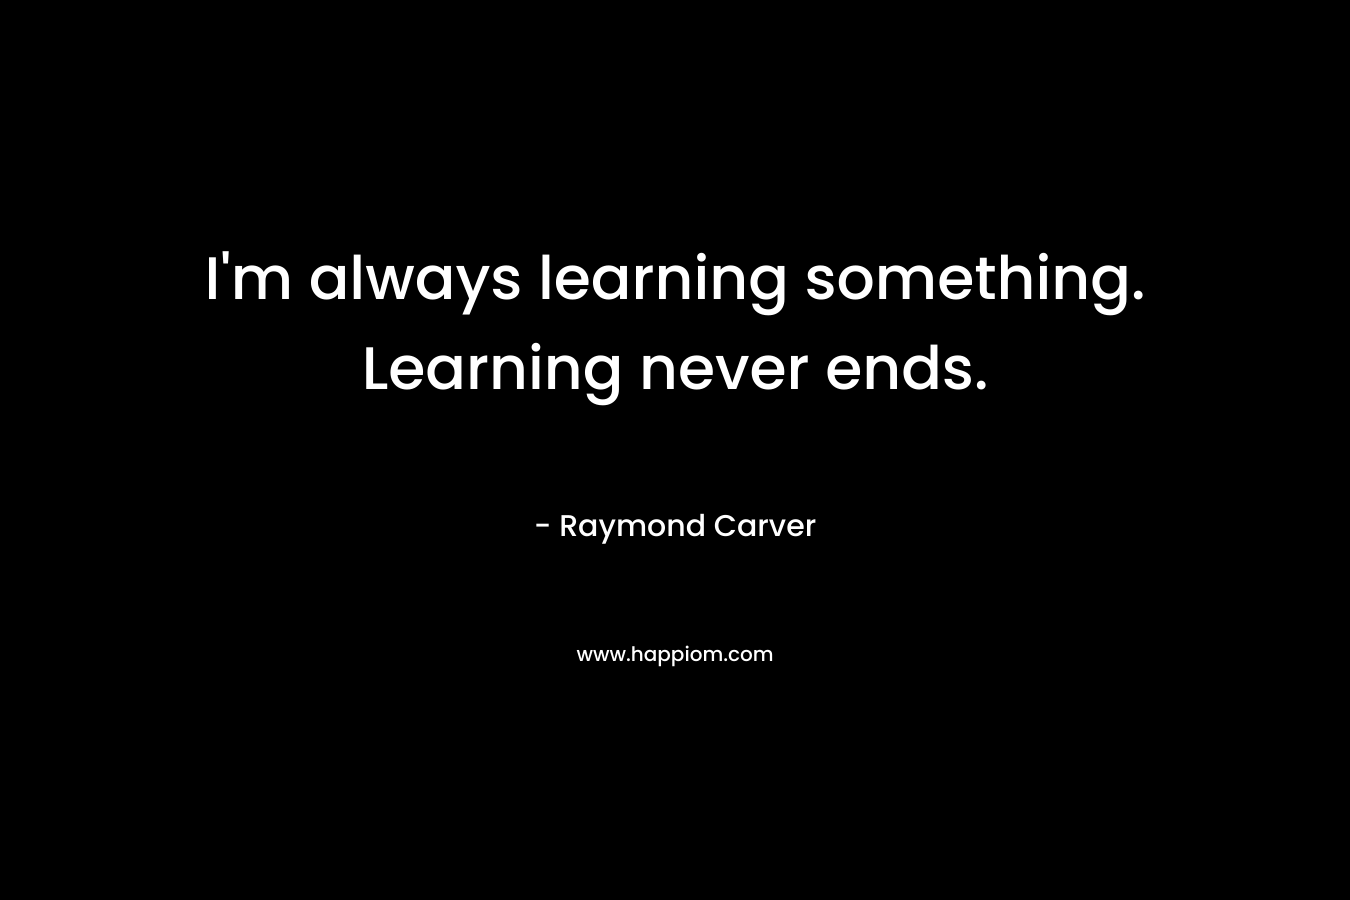 I'm always learning something. Learning never ends.